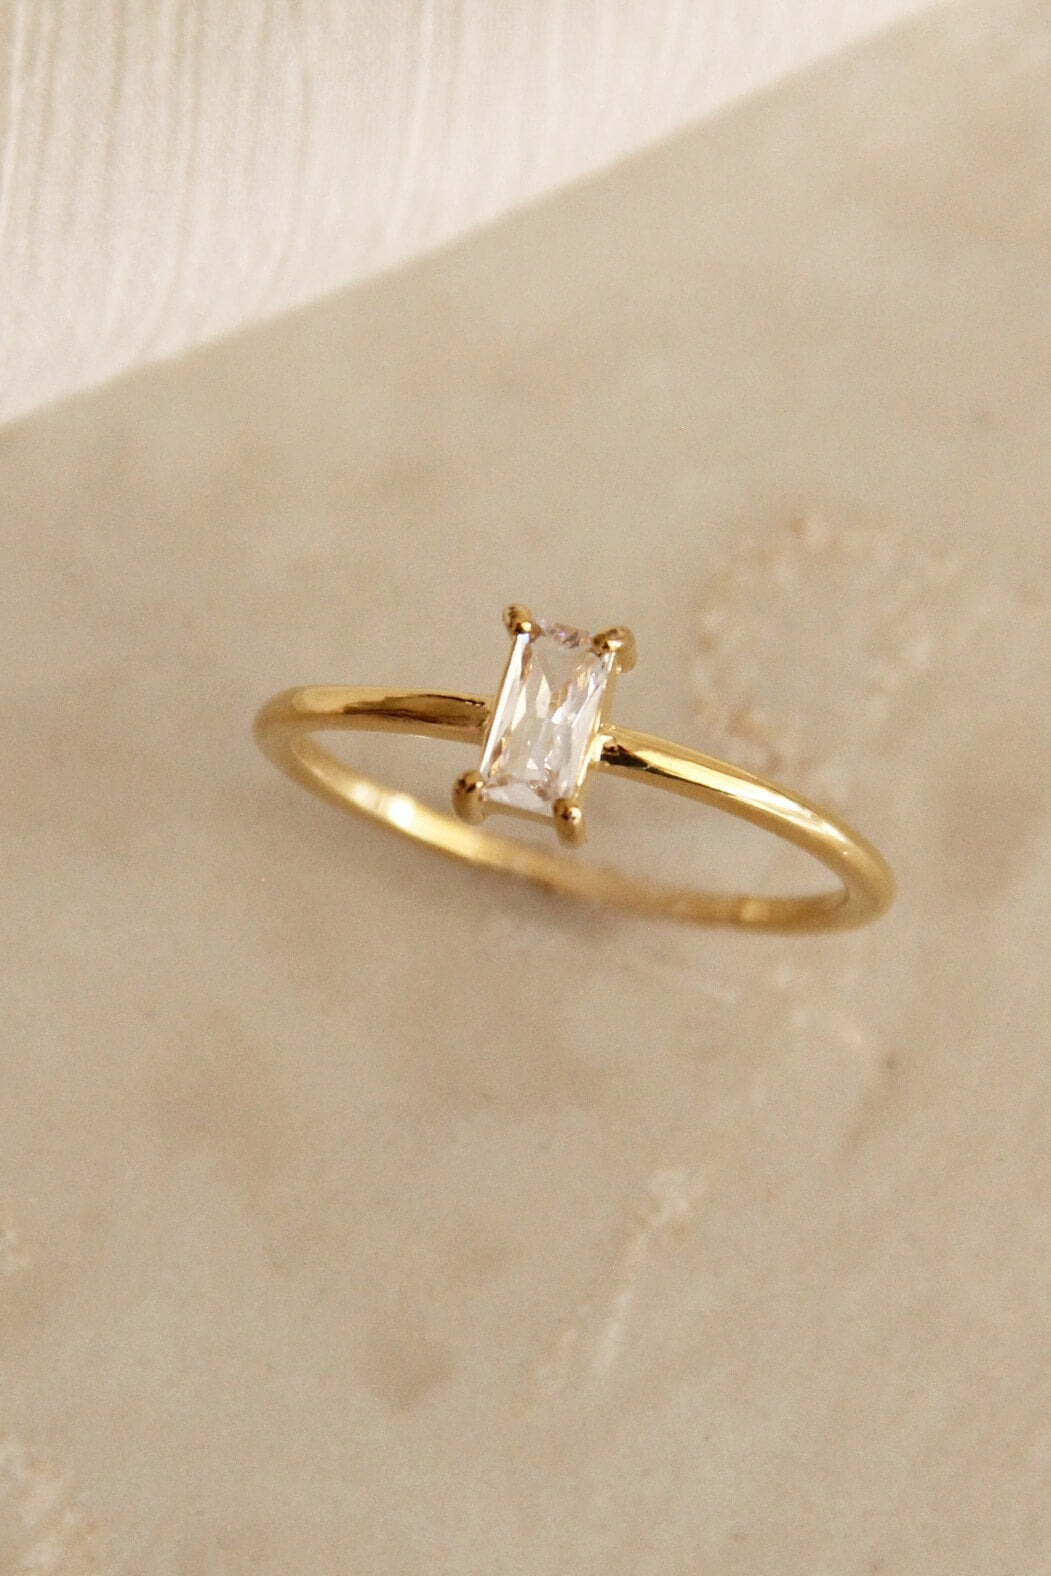 Maive baguette ring